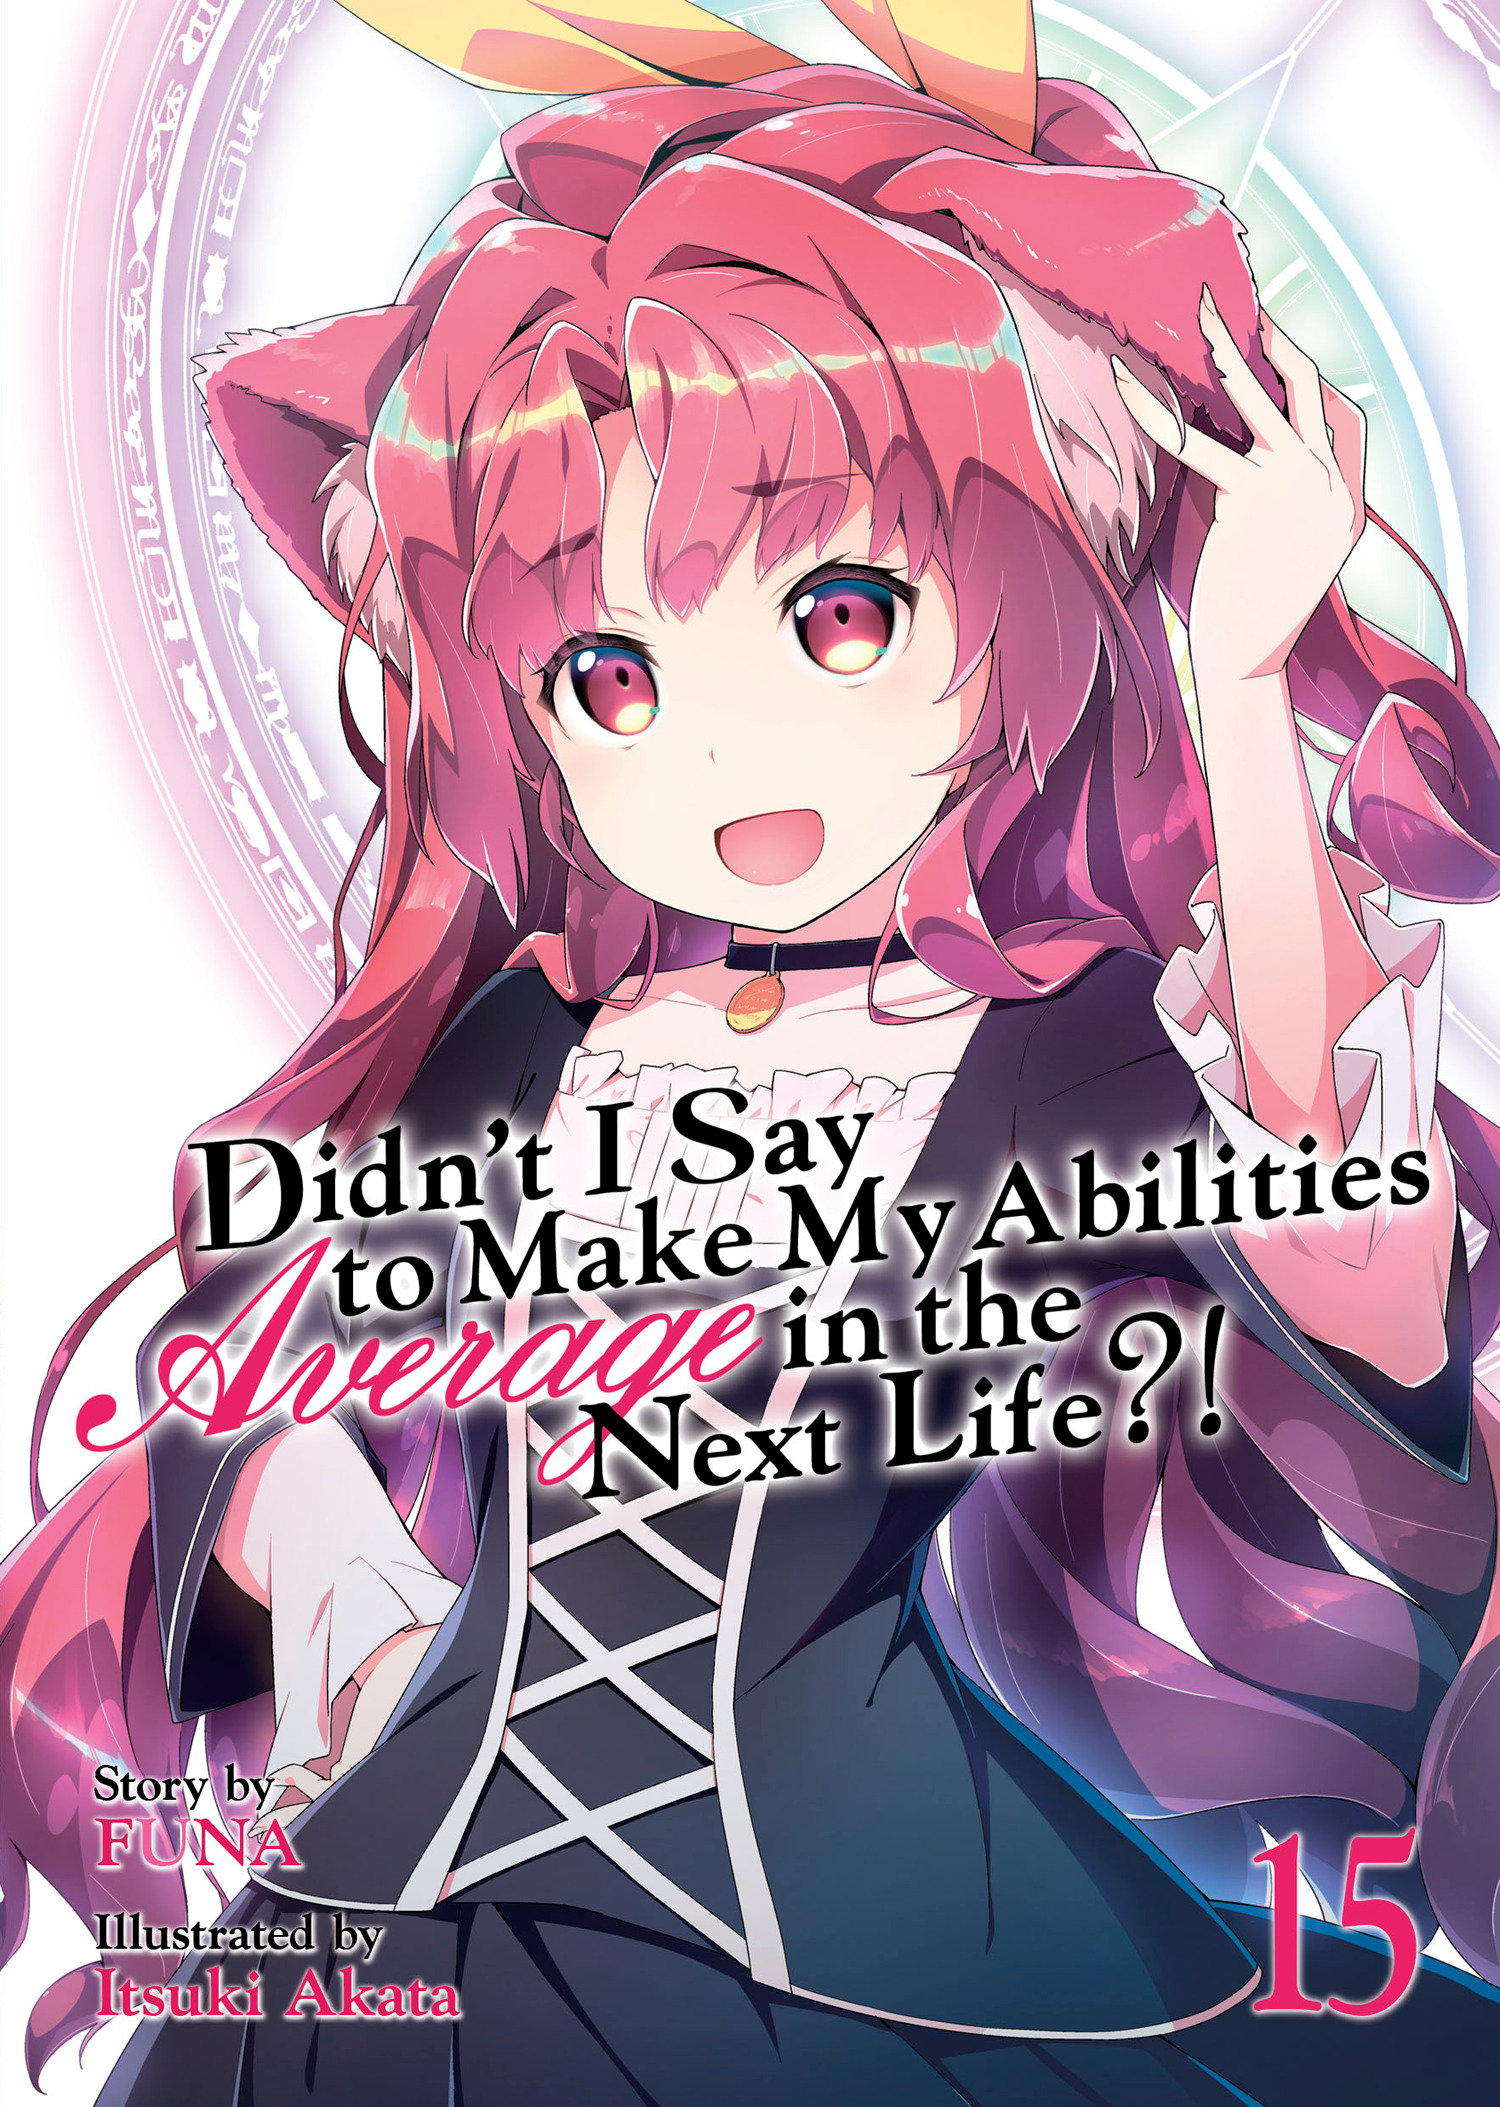 Didn't I Say to Make My Abilities Average in the Next Life?! Light Novel Volume 15